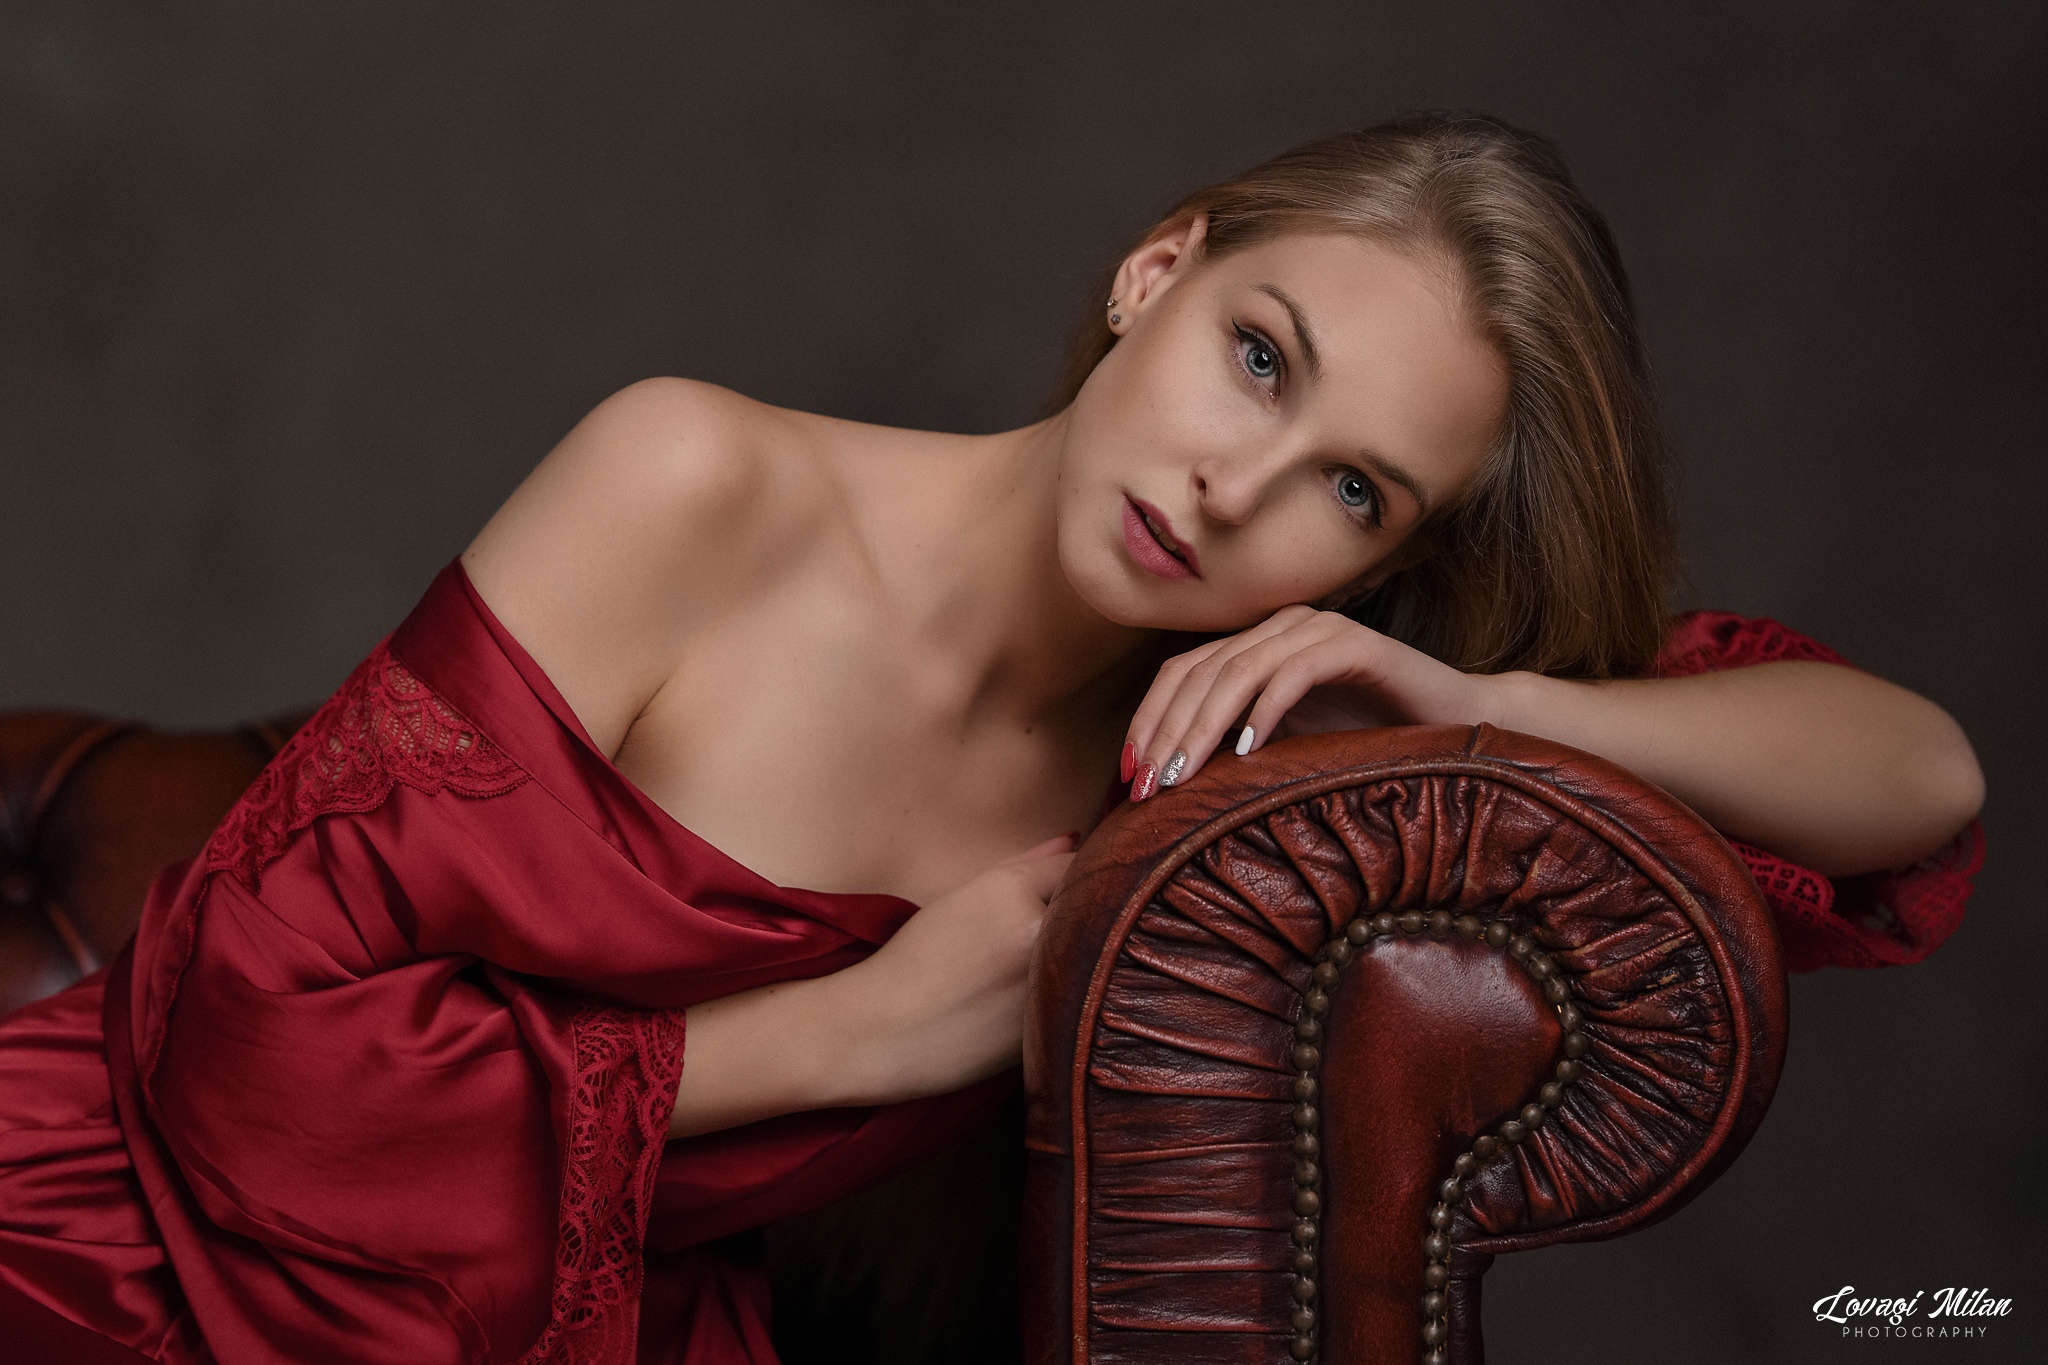 People 2048x1365 women bare shoulders portrait model women indoors Lovagi Milán gray eyes on sofa painted nails blue eyes red dress classy leather couch